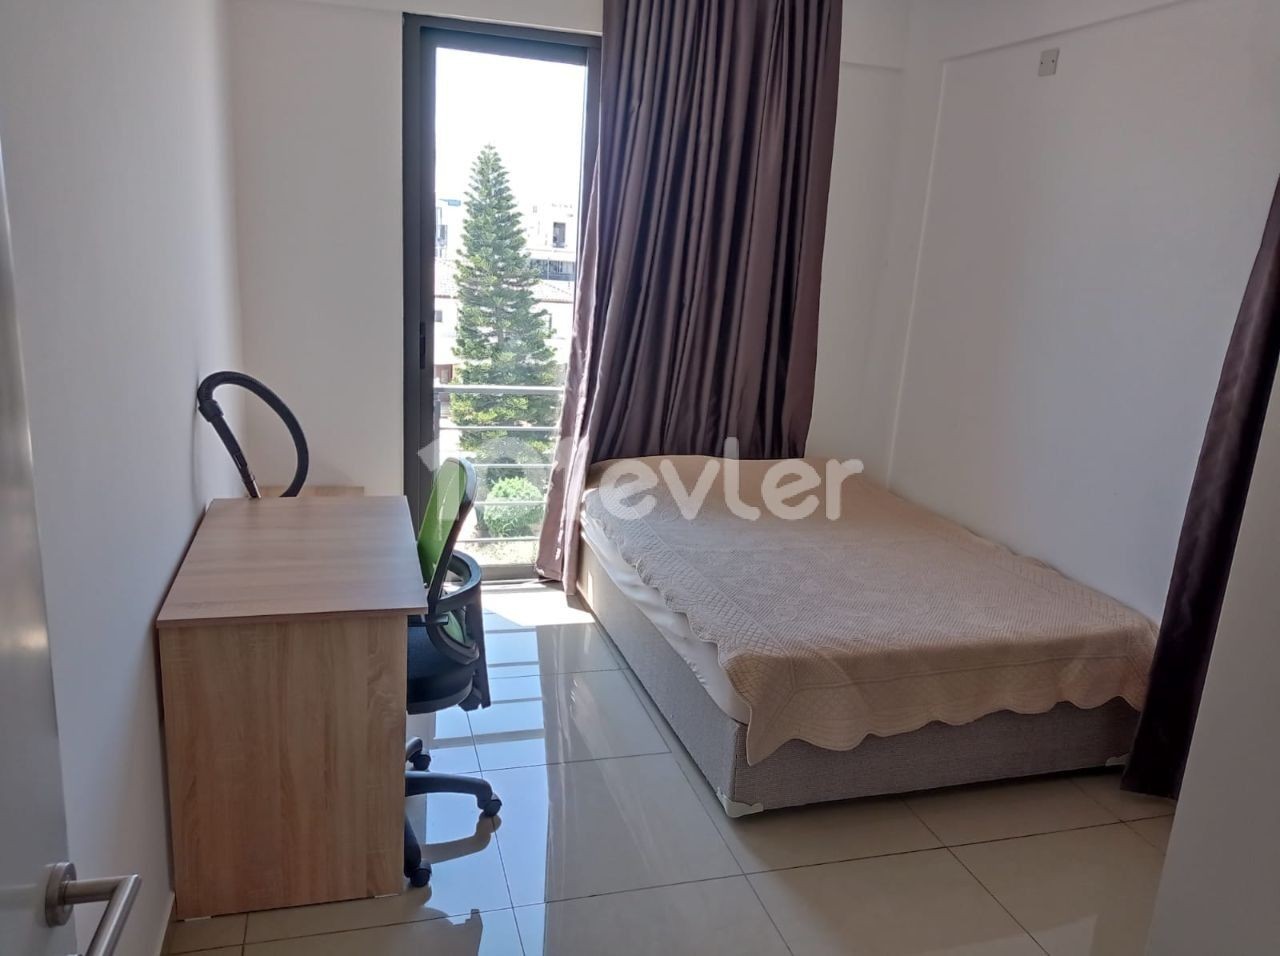 Fully furnished 2+1 flat in a central location in Gönyeli, 5 minutes walking distance to bus stops and markets.